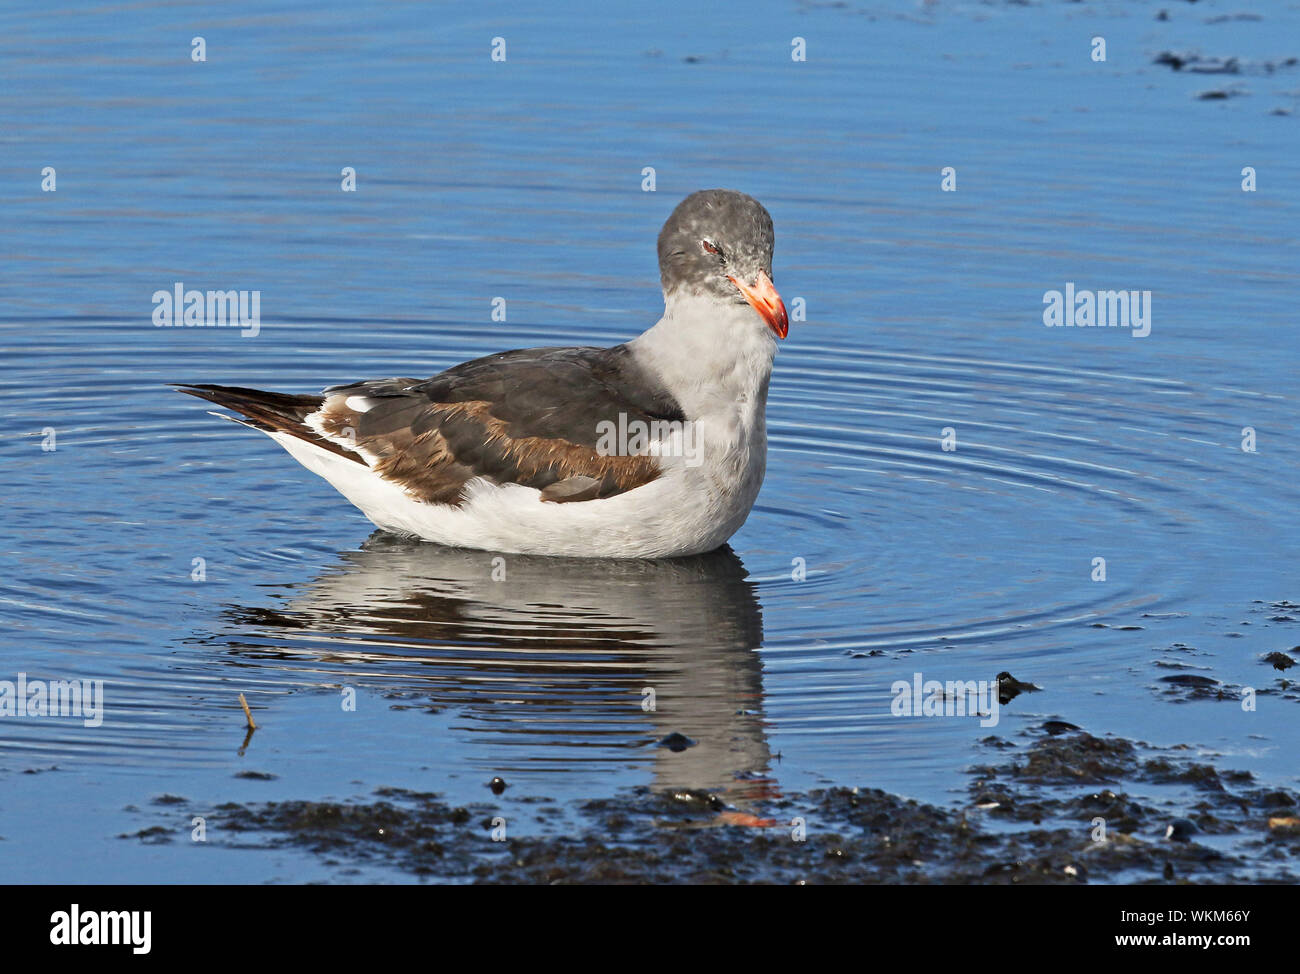 Dolphin Gull (Larus scoresbii) immature standing in shallow water bathing  Tierra del Fuego, Chile            January Stock Photo